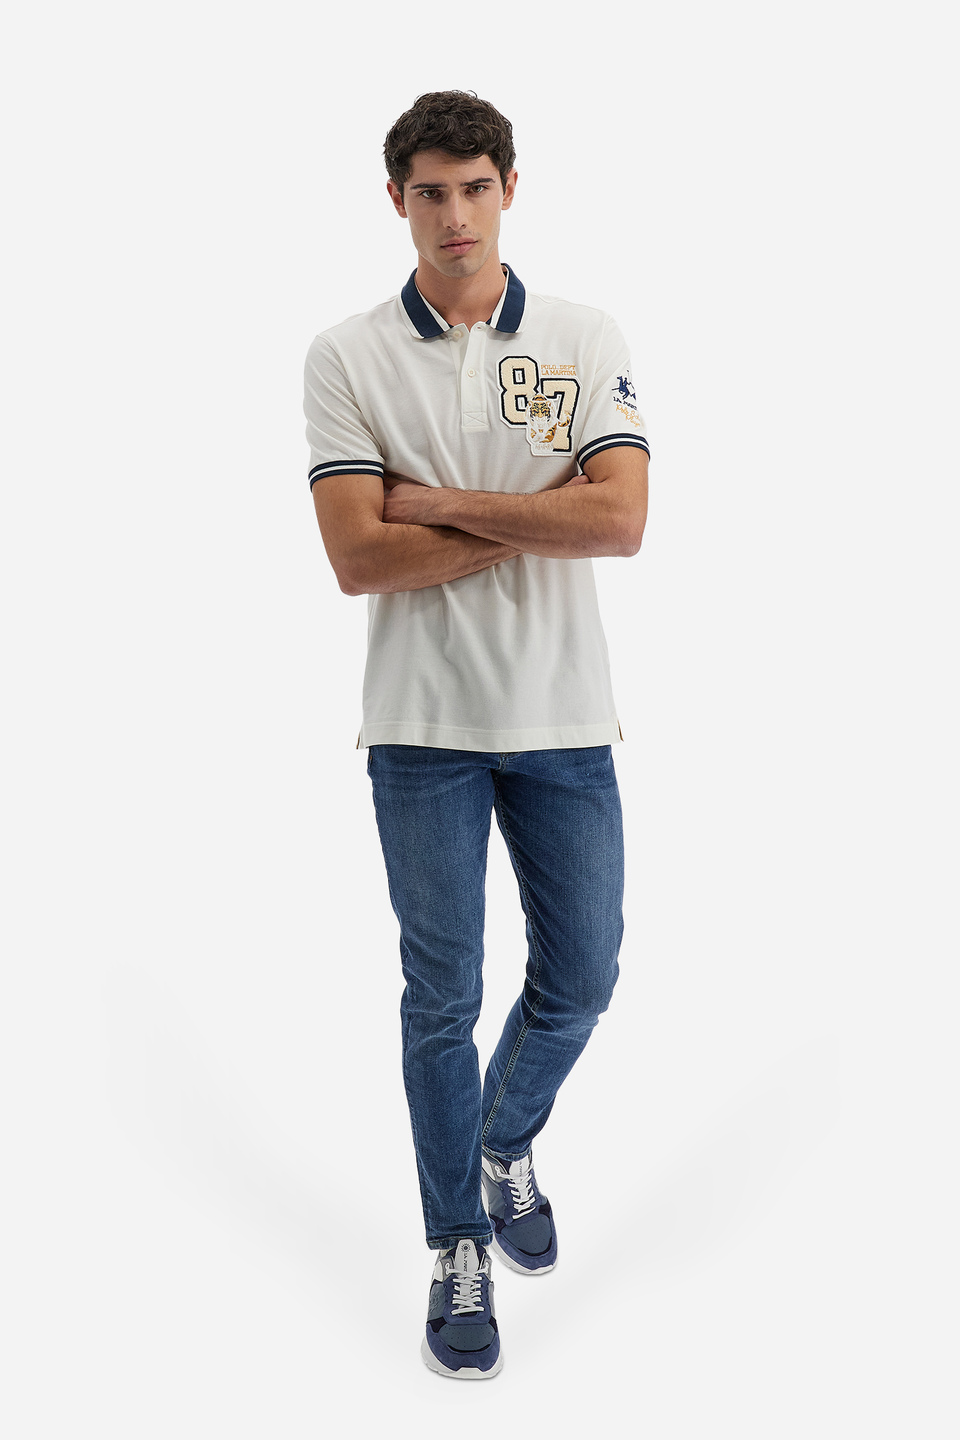 Men's short-sleeved polo shirt Polo Academy solid color mini logo and maxi patch - Vasco | La Martina - Official Online Shop